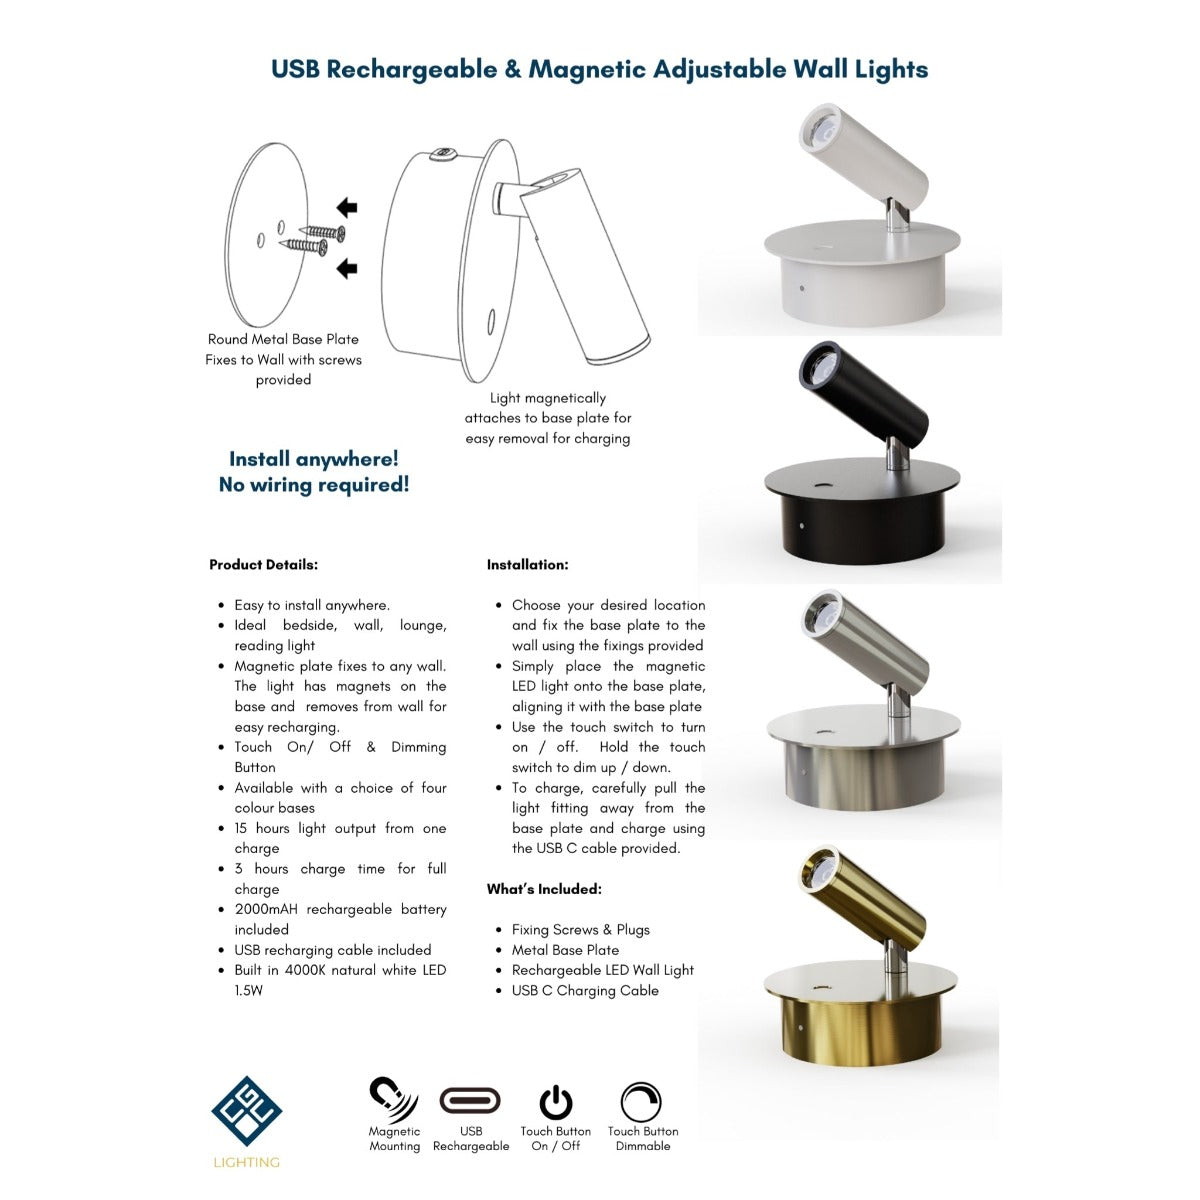 It's innovative magnetic mounting function makes it easy to remove to recharge, each full 3 hour charge lasts 15 hours. Designed for bedside or as reading light this adjustable light is not only aesthetically pleasing but also the perfect lighting solution for those dark spots in your home.